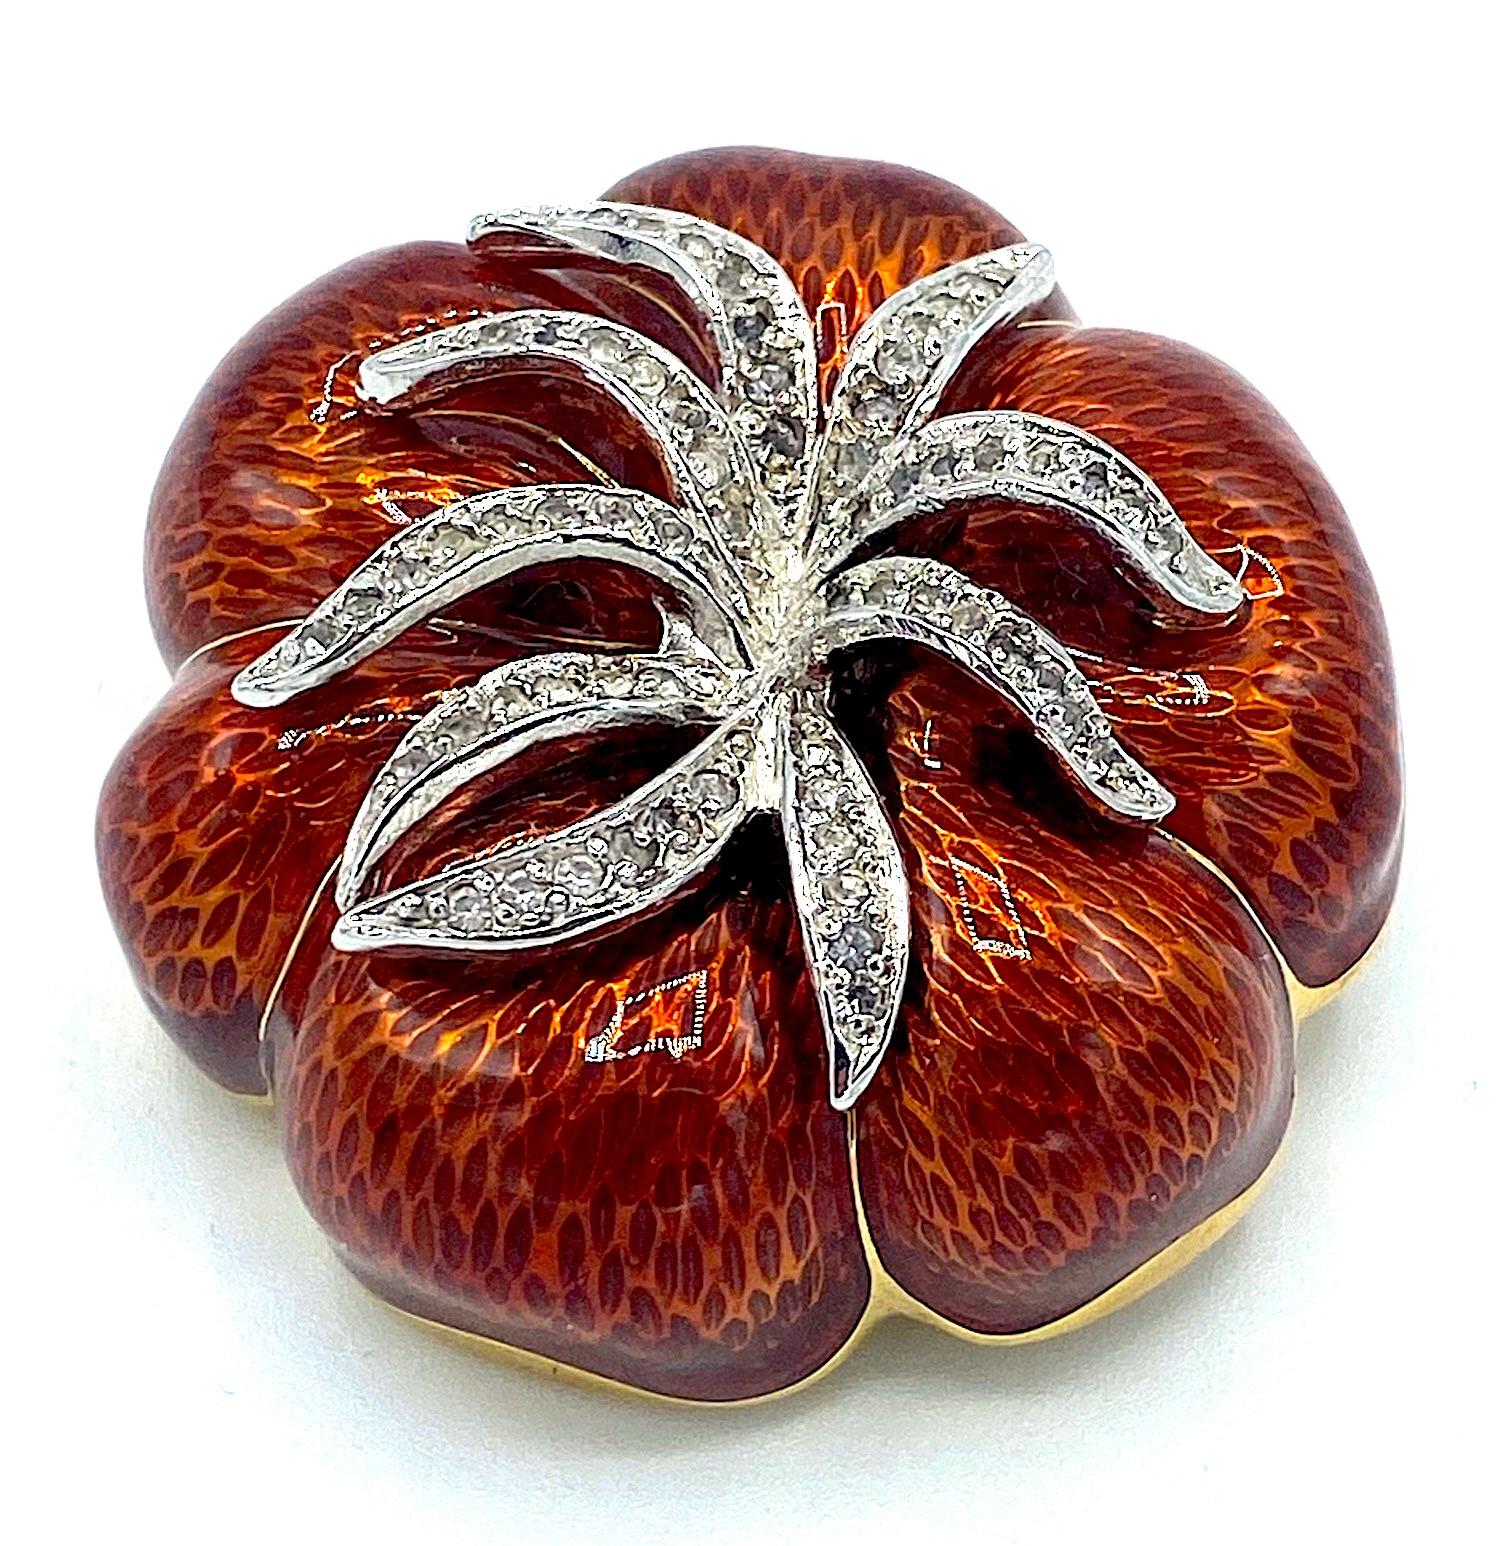 A beautifully made honey gold amber color enamel petal flower brooch by famous fashion designer Judith Leiber. The craftsmanship is super as all her creations are known to be. Judith's jewelry pieces were made in limited and small collections. The